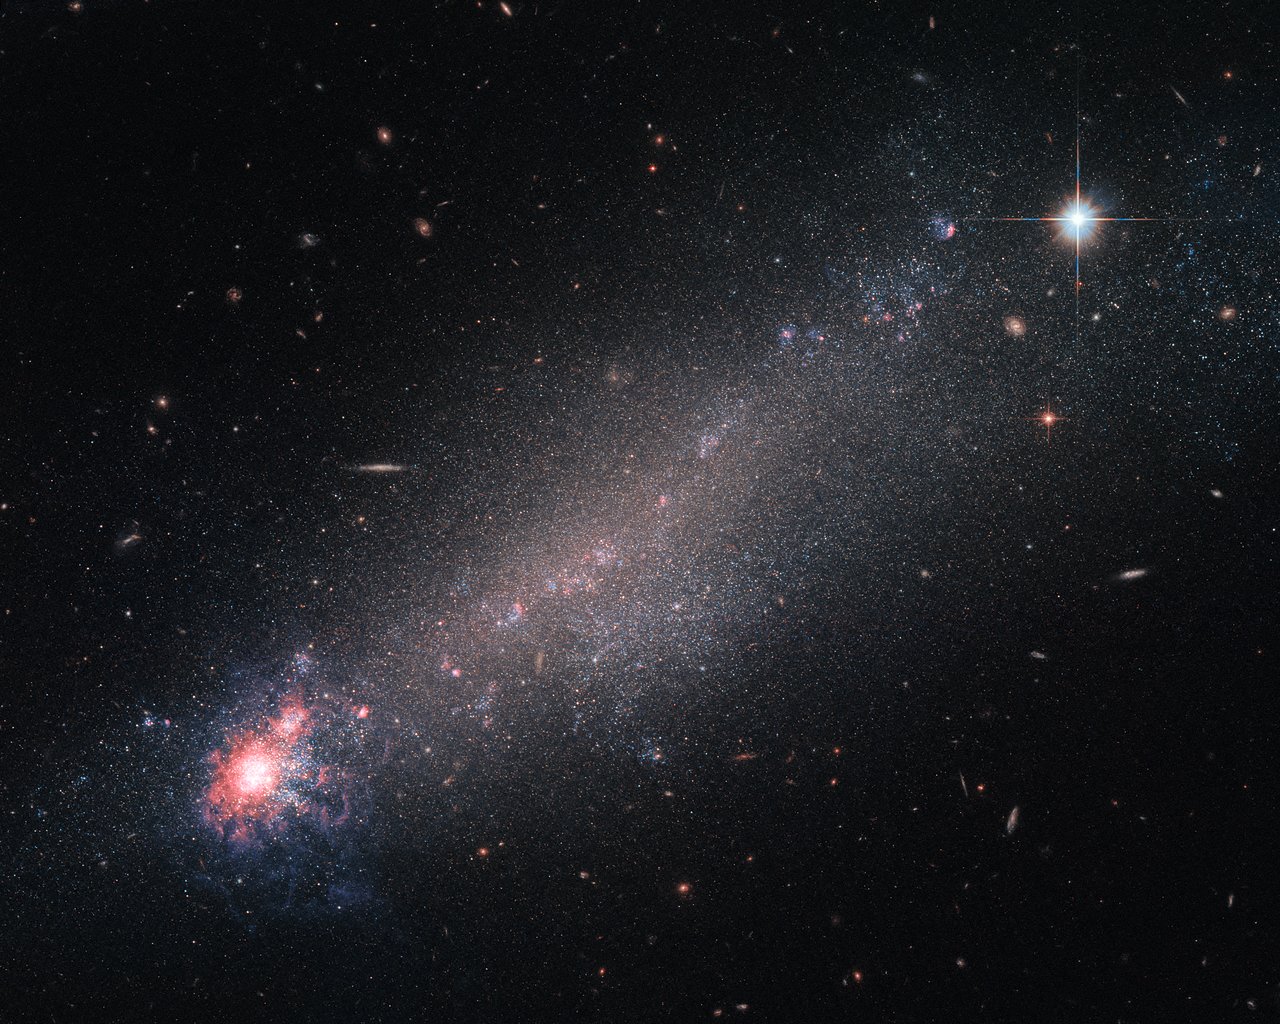 The lesser-known constellation of Canes Venatici (The Hunting Dogs), is home to a variety of deep-sky objects — including this beautiful galaxy, known as NGC 4861. Astronomers are still debating on how to classify it: While its physical properties — such as mass, size and rotational velocity — indicate it to be a spiral galaxy, its appearance looks more like a comet with its dense, luminous “head” and dimmer “tail” trailing behind. Features more fitting with a dwarf irregular galaxy. Although small and messy, galaxies like NGC 4861 provide astronomers with interesting opportunities for study. Small galaxies have lower gravitational potentials, which simply means that it takes less energy to move stuff about inside them than it does in other galaxies. As a result, moving in, around, and through such a tiny galaxy is quite easy to do, making them far more likely to be suffused with streams and outflows of speedy charged particles known as galactic winds, which can flood such galaxies with little effort. These galactic winds can be powered by the ongoing process of star formation, which involves huge amounts of energy. New stars are springing into life within the bright, colourful ‘head’ of NGC 4861 and ejecting streams of high-speed particles as they do so, which flood outwards to join the wider galactic wind. While NGC 4861 would be a perfect candidate to study such winds, recent studies did not find any galactic winds in it.